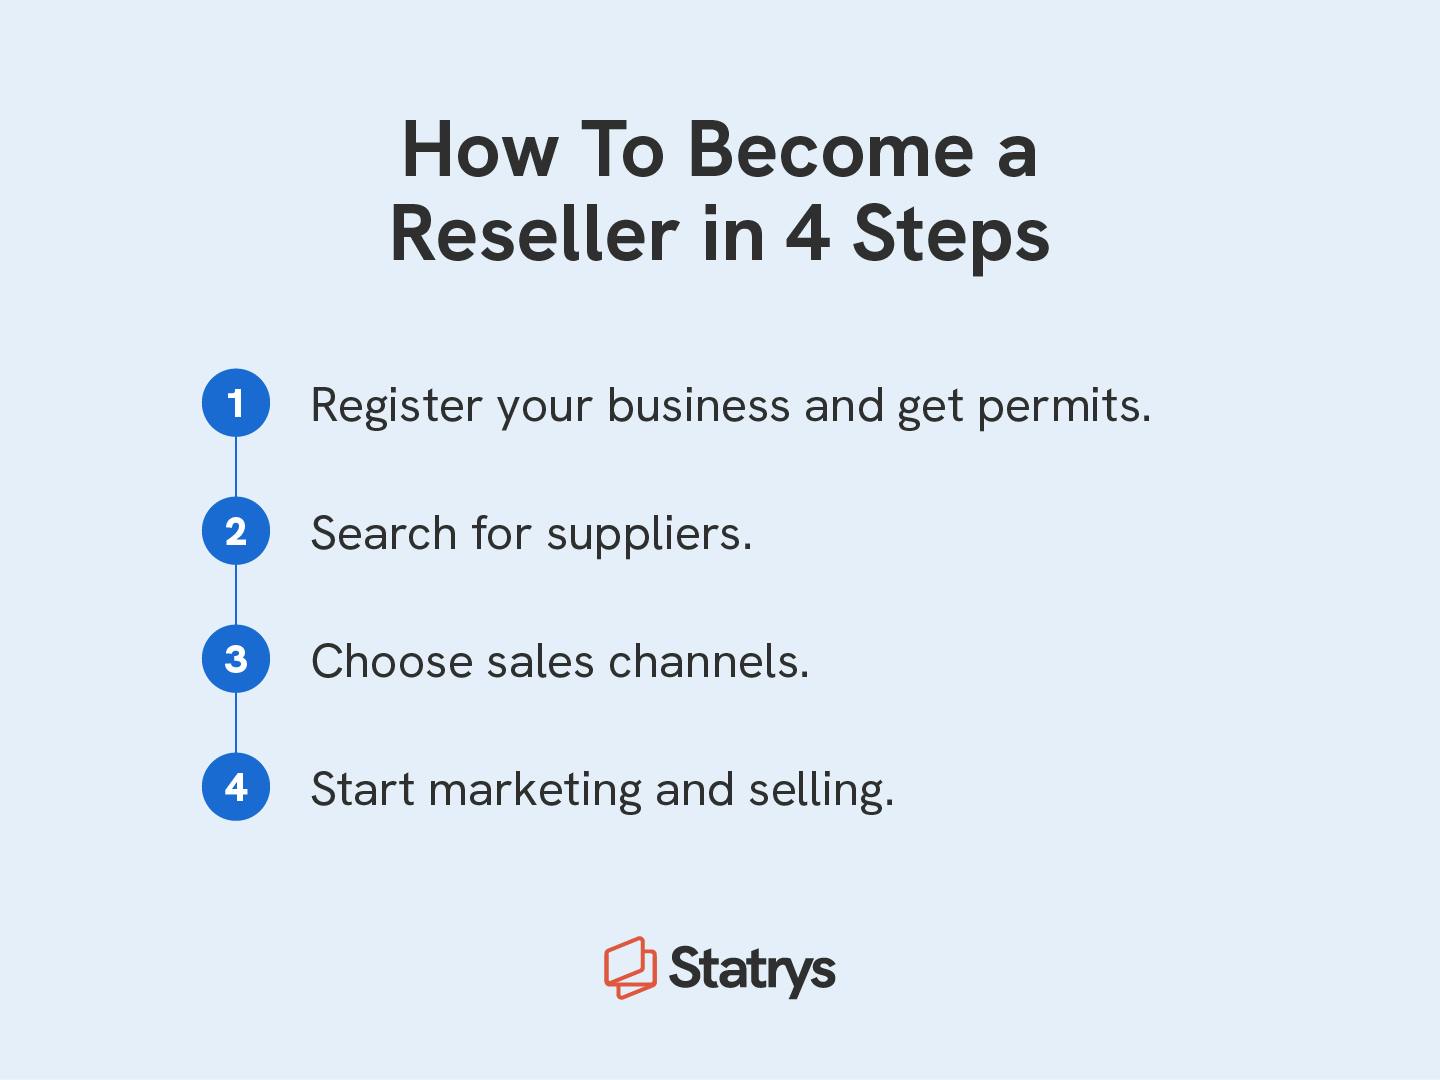 Chart with four reasons to become a reseller, including registering your business, searching for suppliers, choosing sales channels, and beginning to market and sell your products